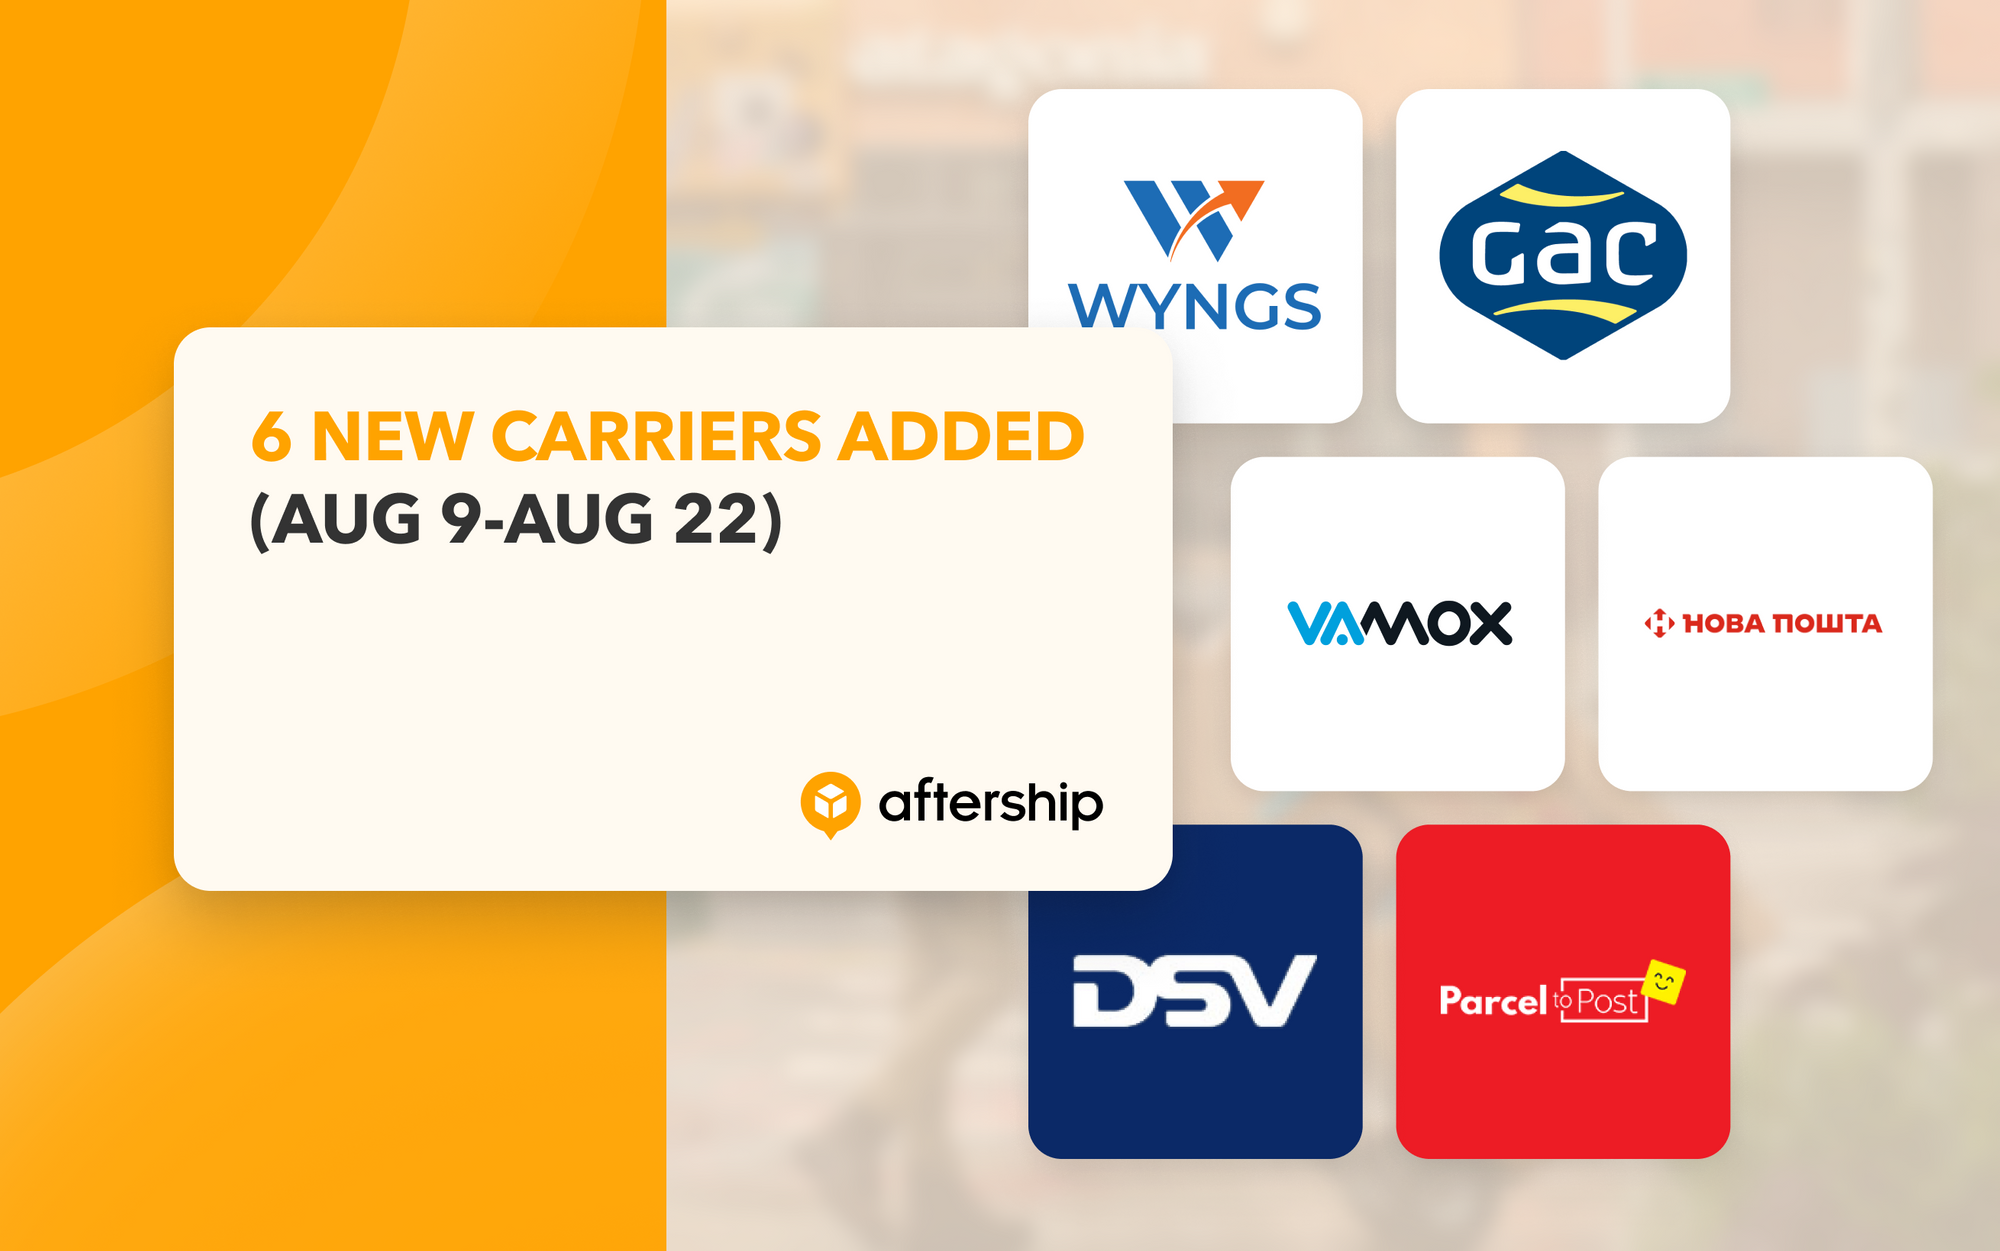 AfterShip adds 6 new couriers in the last two weeks (9th August 2021 to 22nd August 2021)